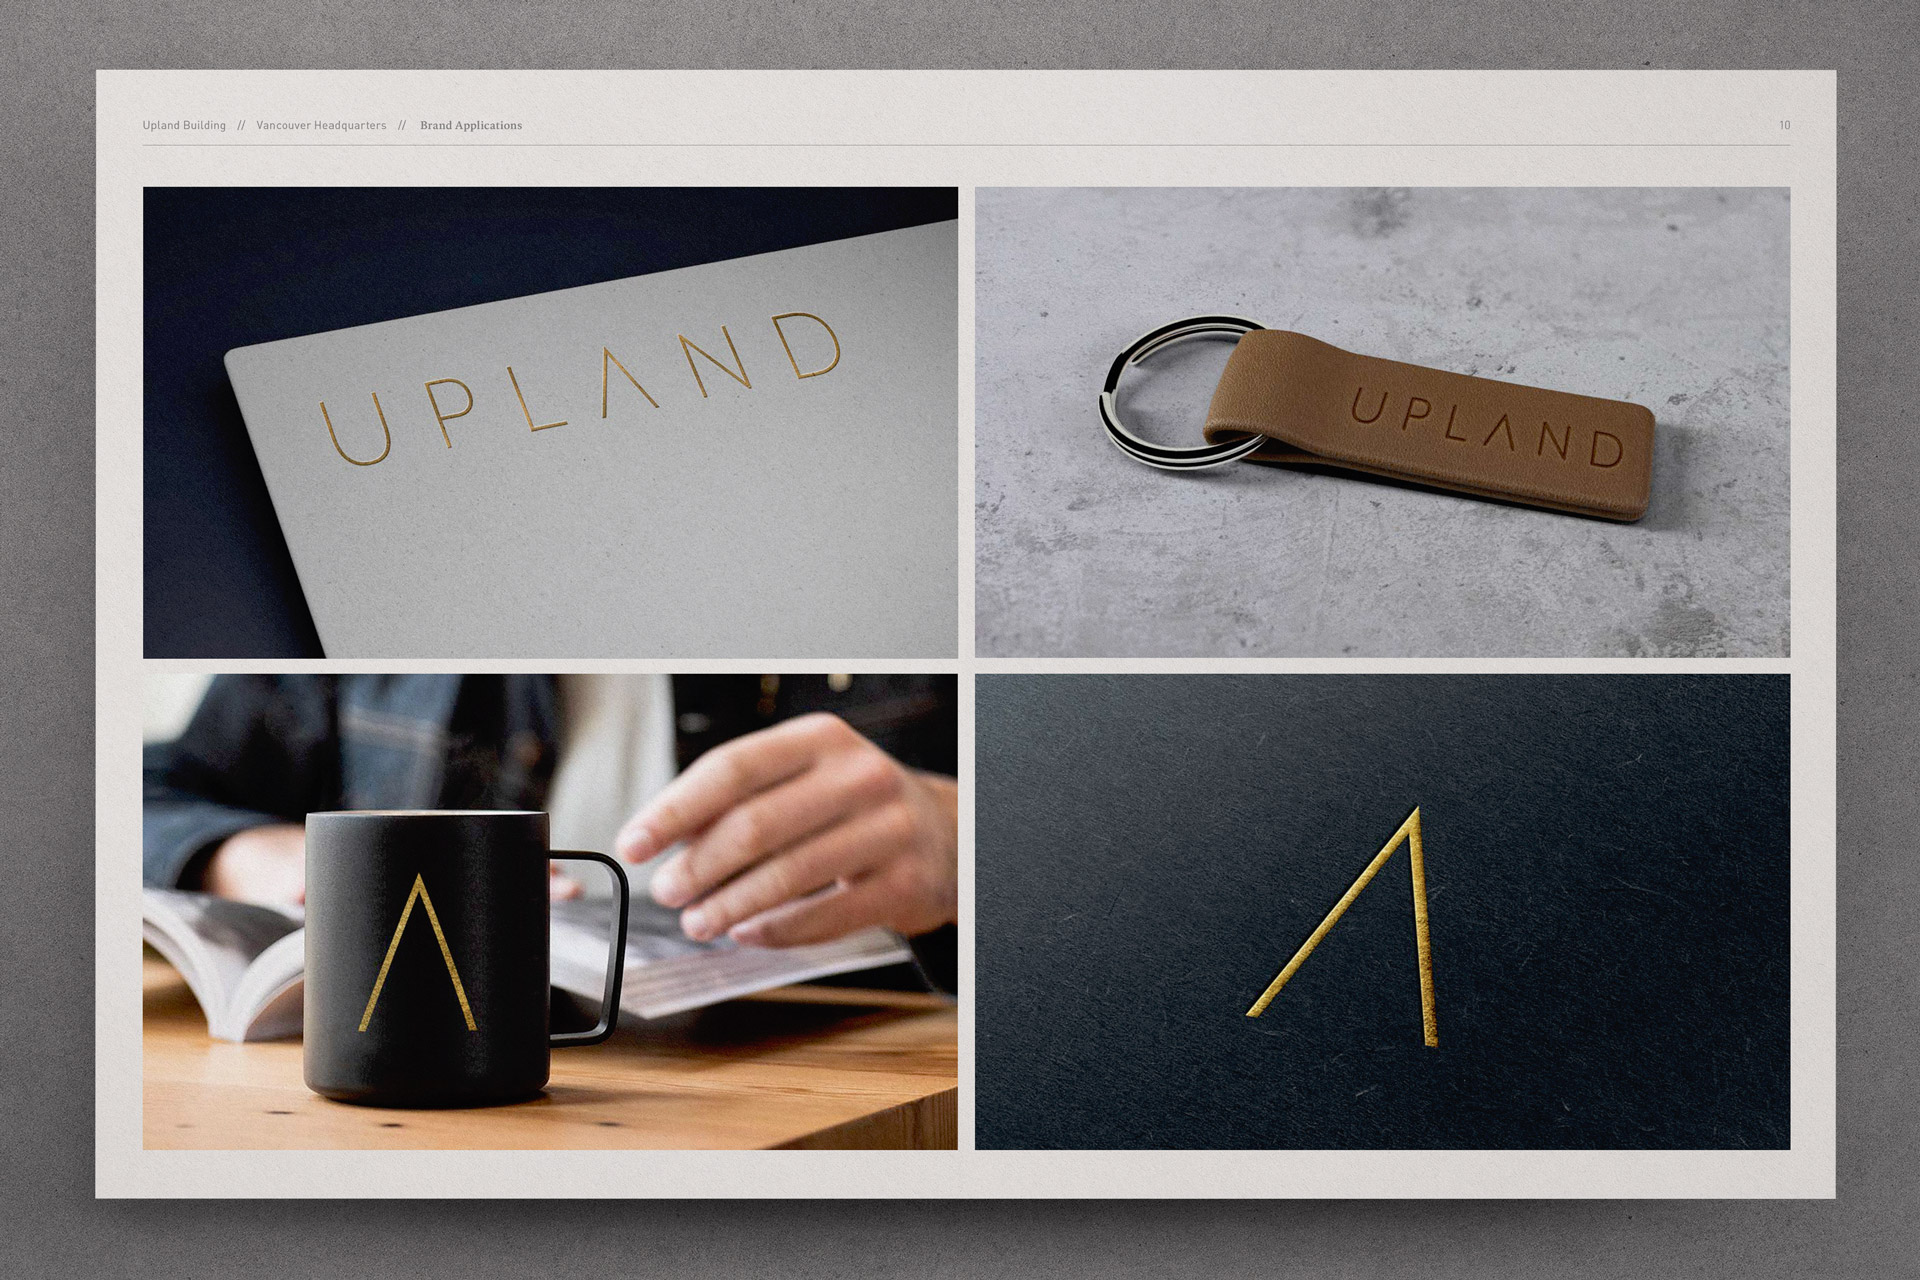 Upland Brand Book Logo mockups of coffee cup and key chain created by Incubate Design for Holland Residential